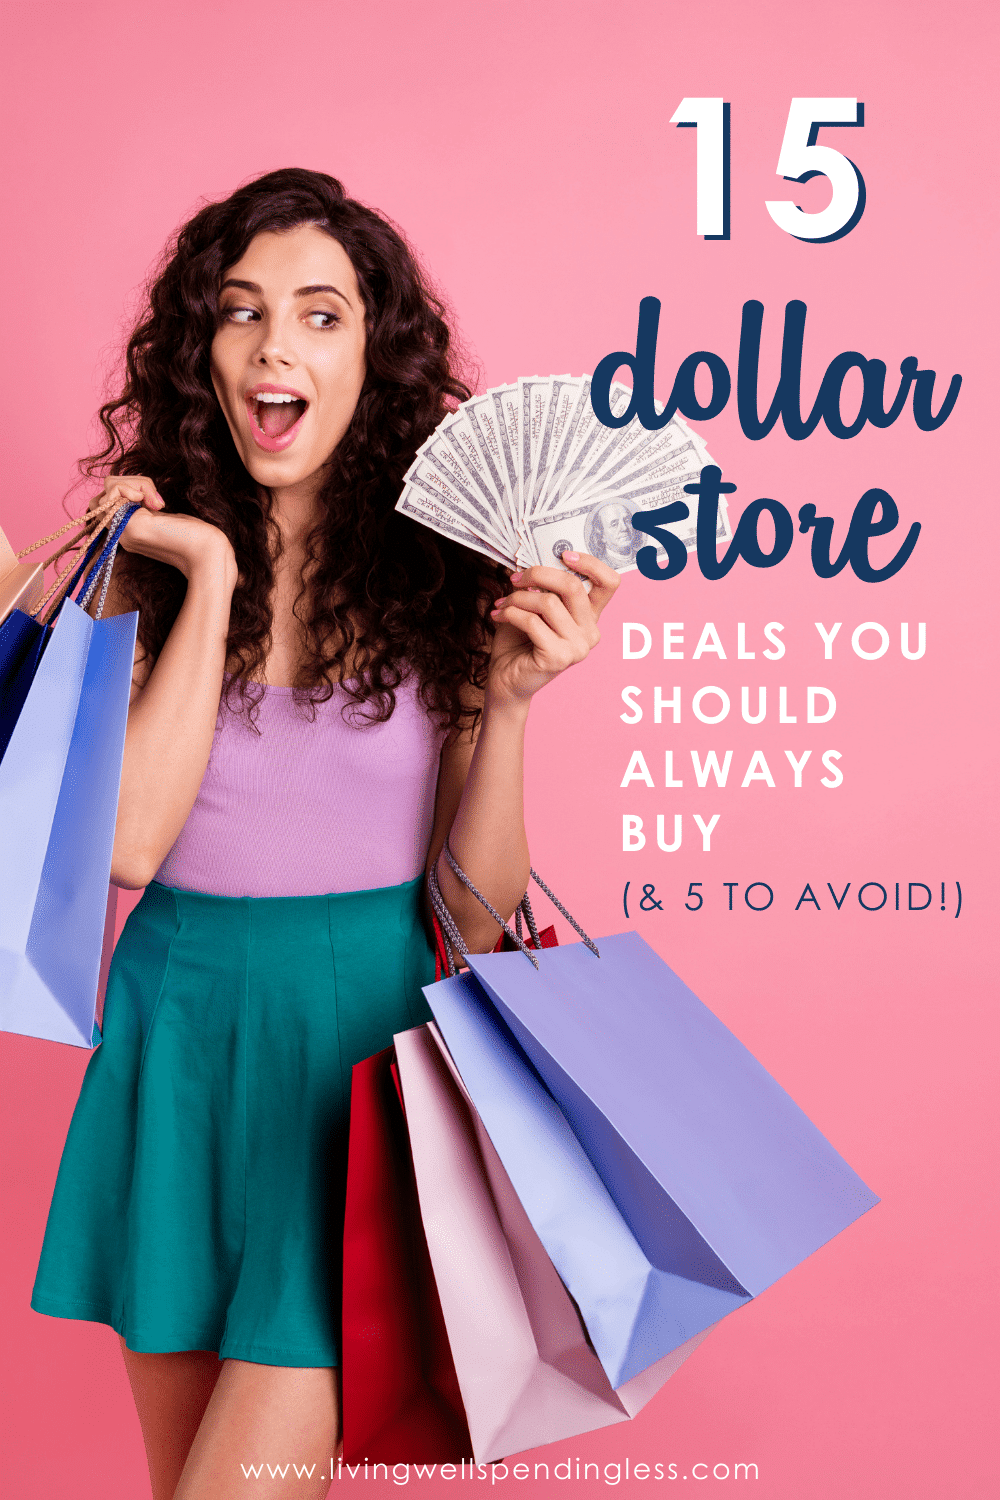 15 Dollar Store Deals You Should Always Buy (& 5 to Avoid!)